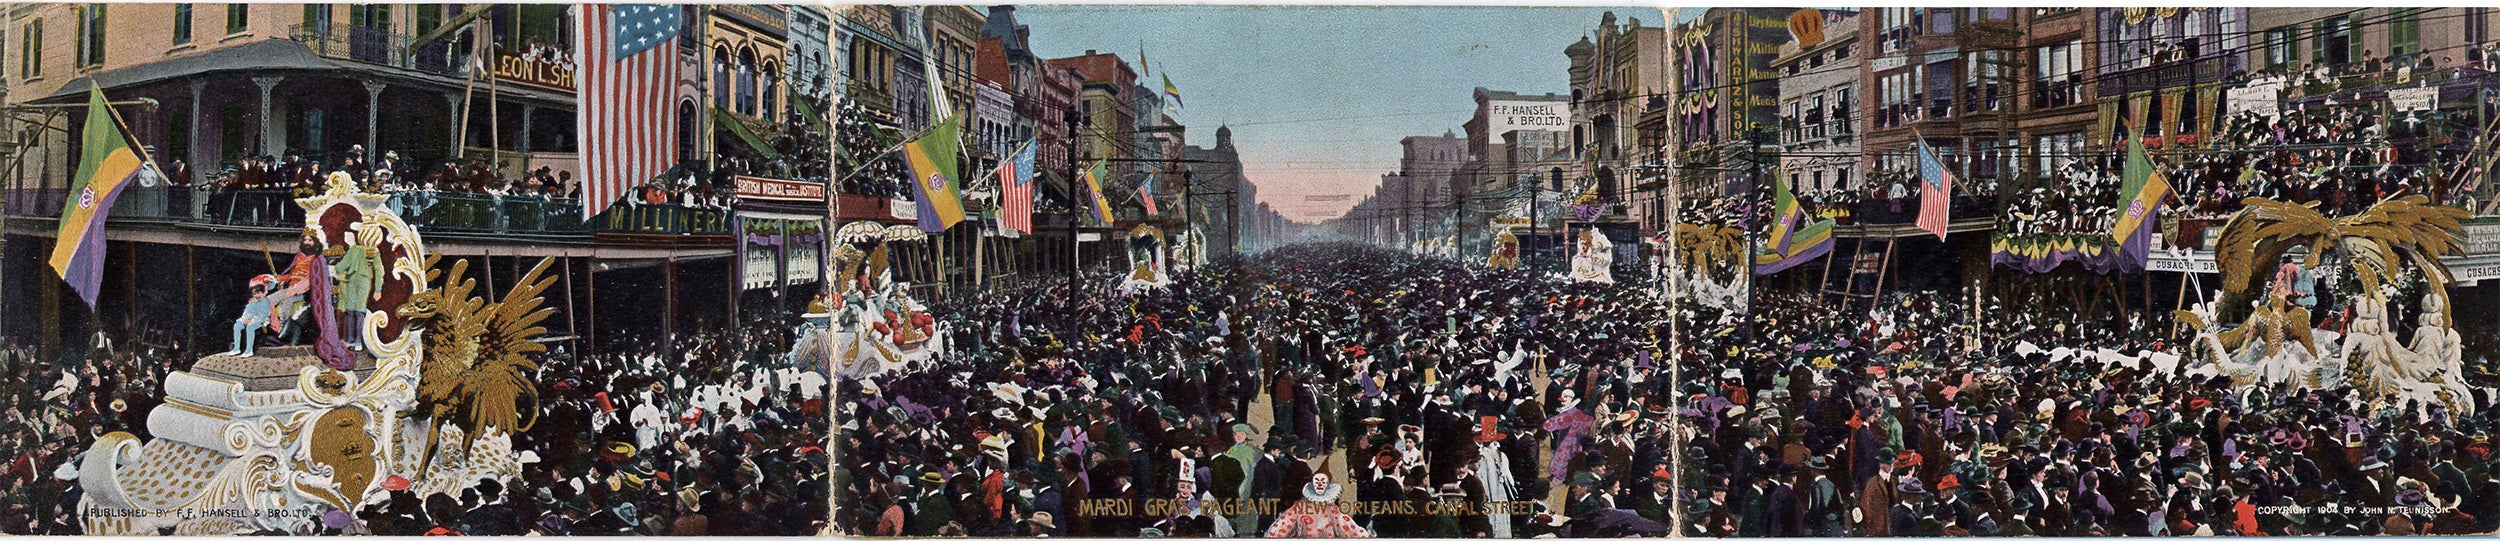 Postcard panorama of "Rex" parade on Canal Street, New Orleans Mardi Gras, 1904